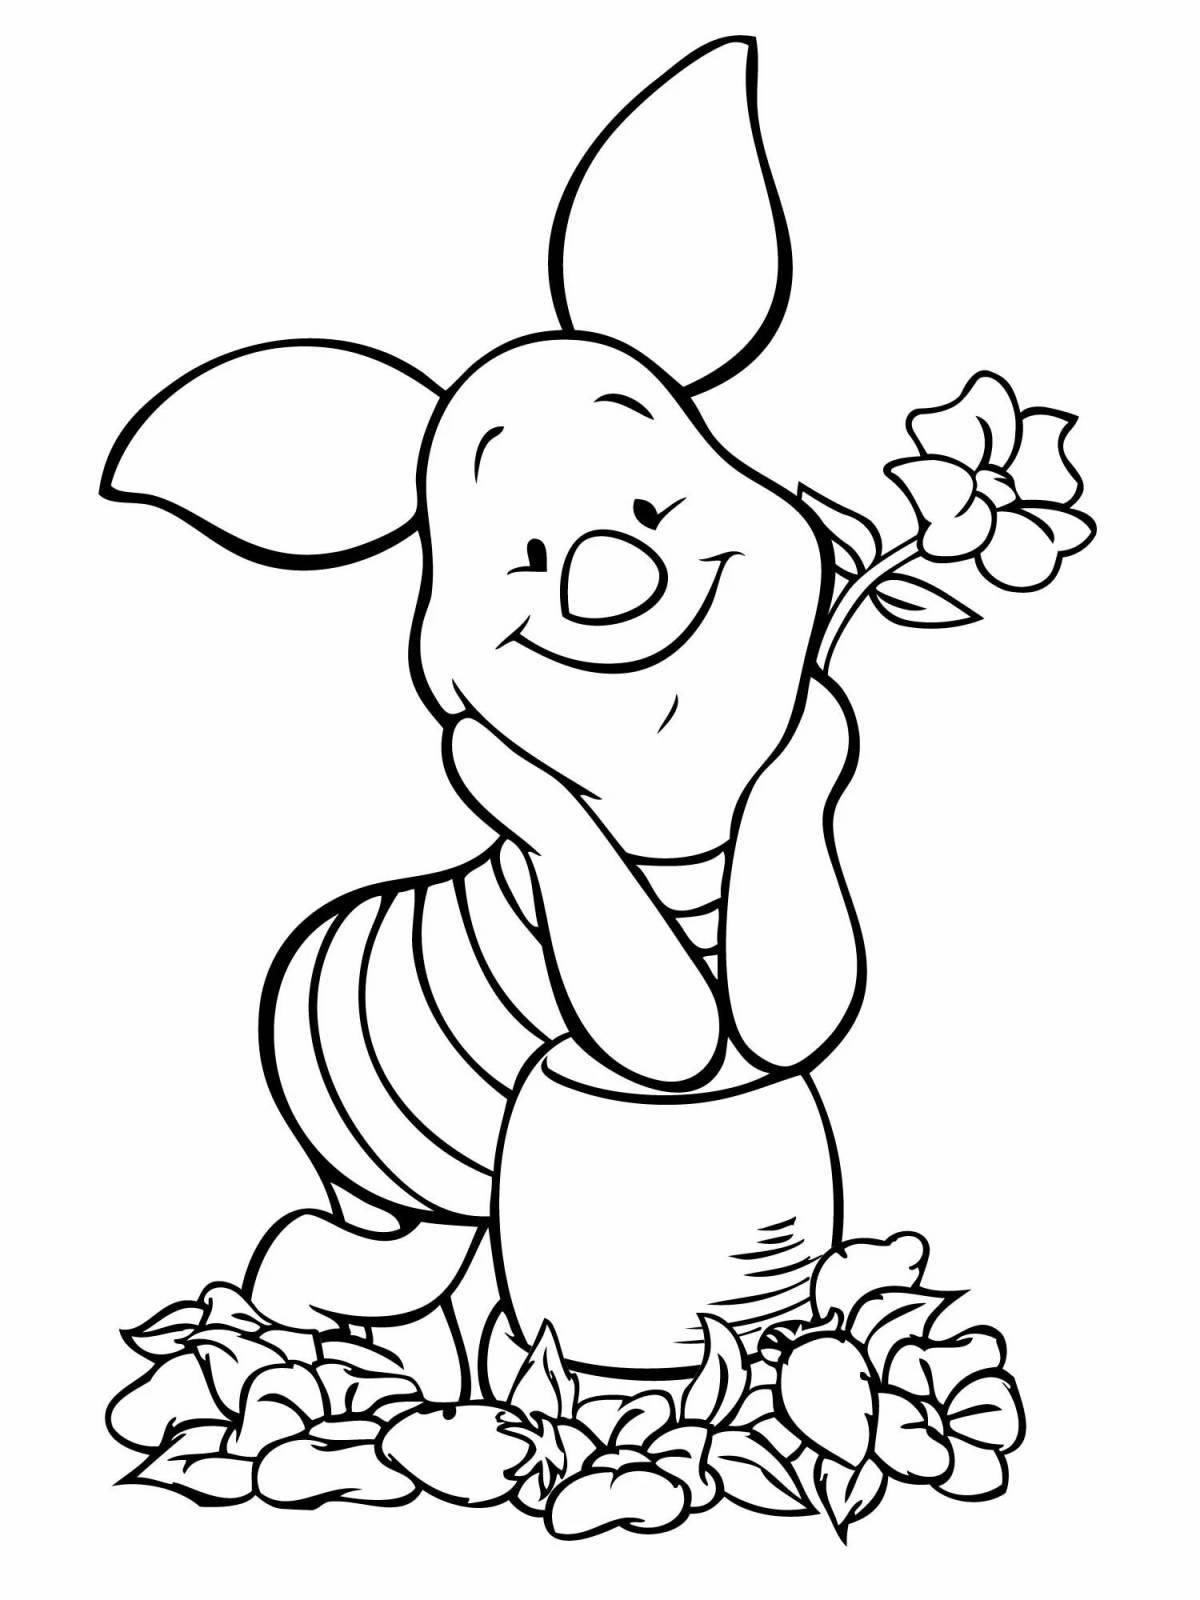 Adorable cartoon characters coloring book for 3-4 year olds